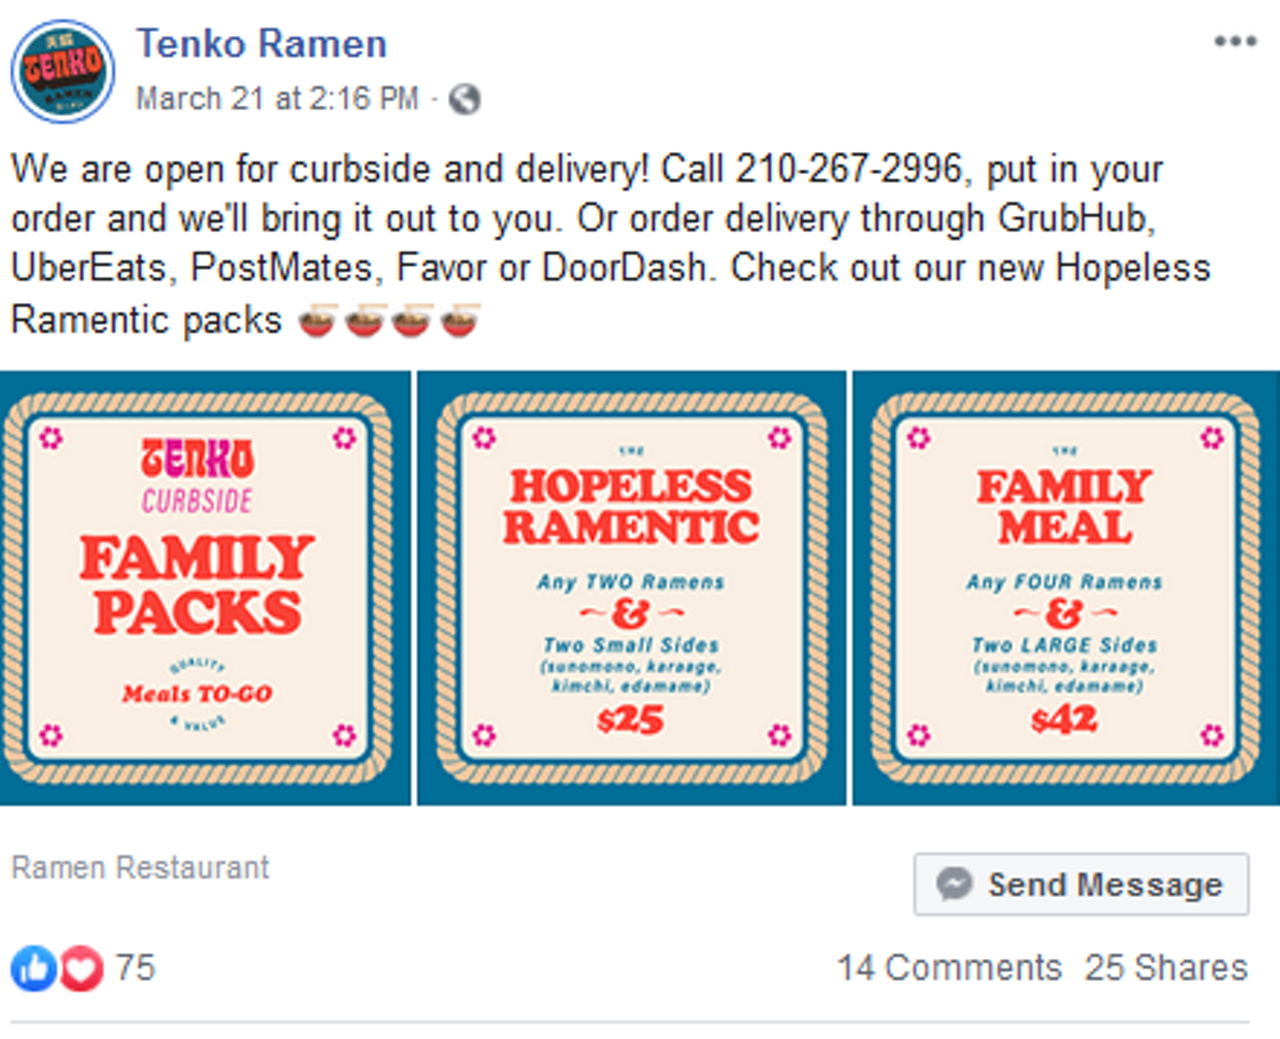 Tenko Ramen
Are you a hopeless ramentic? Let’s face it, instant noodles just aren’t the same, and hoarders have made the good flavors hard to get anyways. Why settle when true umame is just a few clicks away?